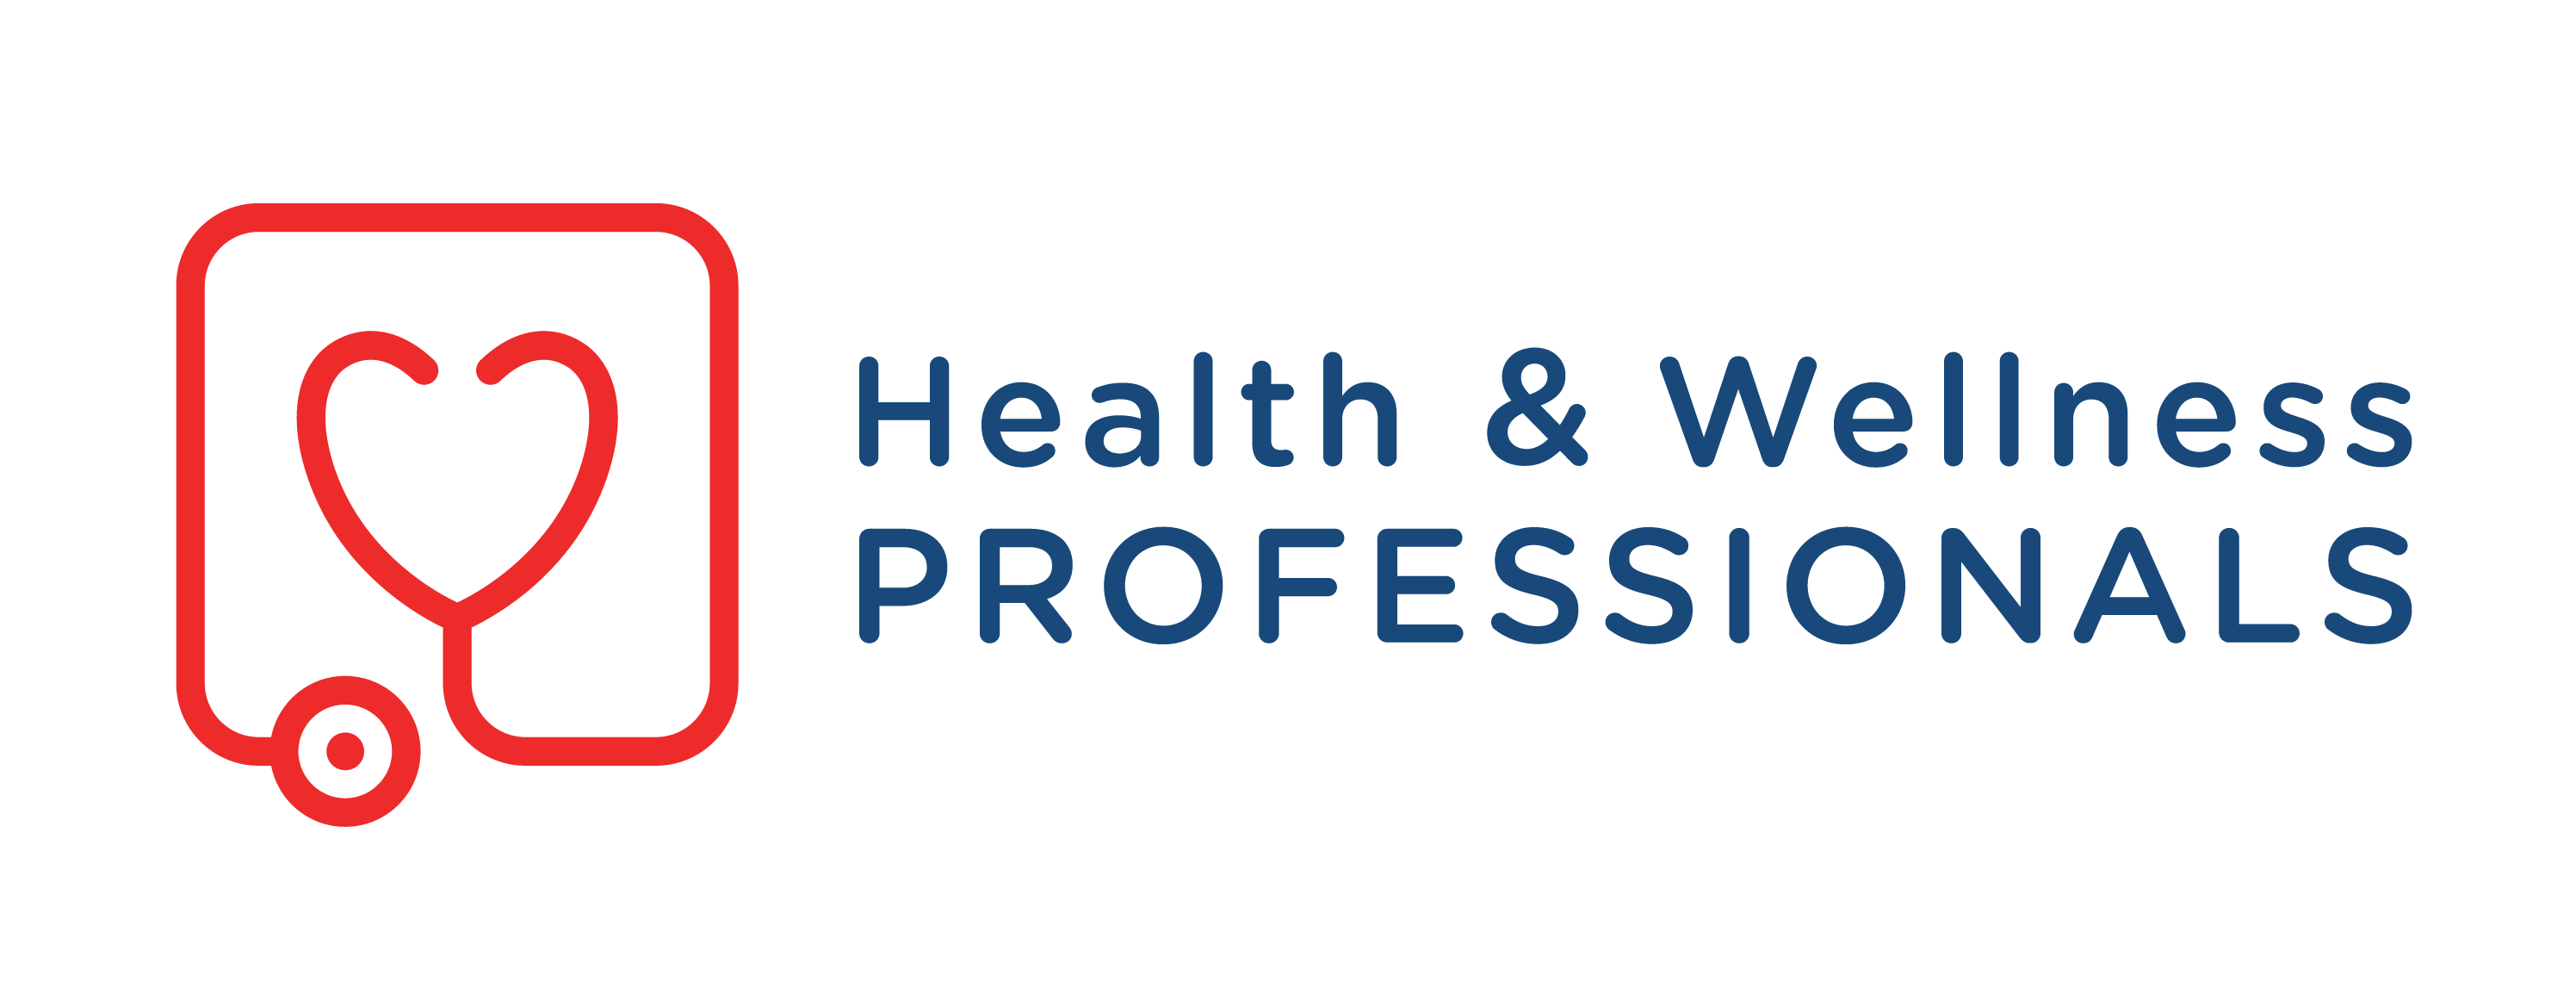 Health and Wellness Professionals – Home Test Kit Ordering Portal